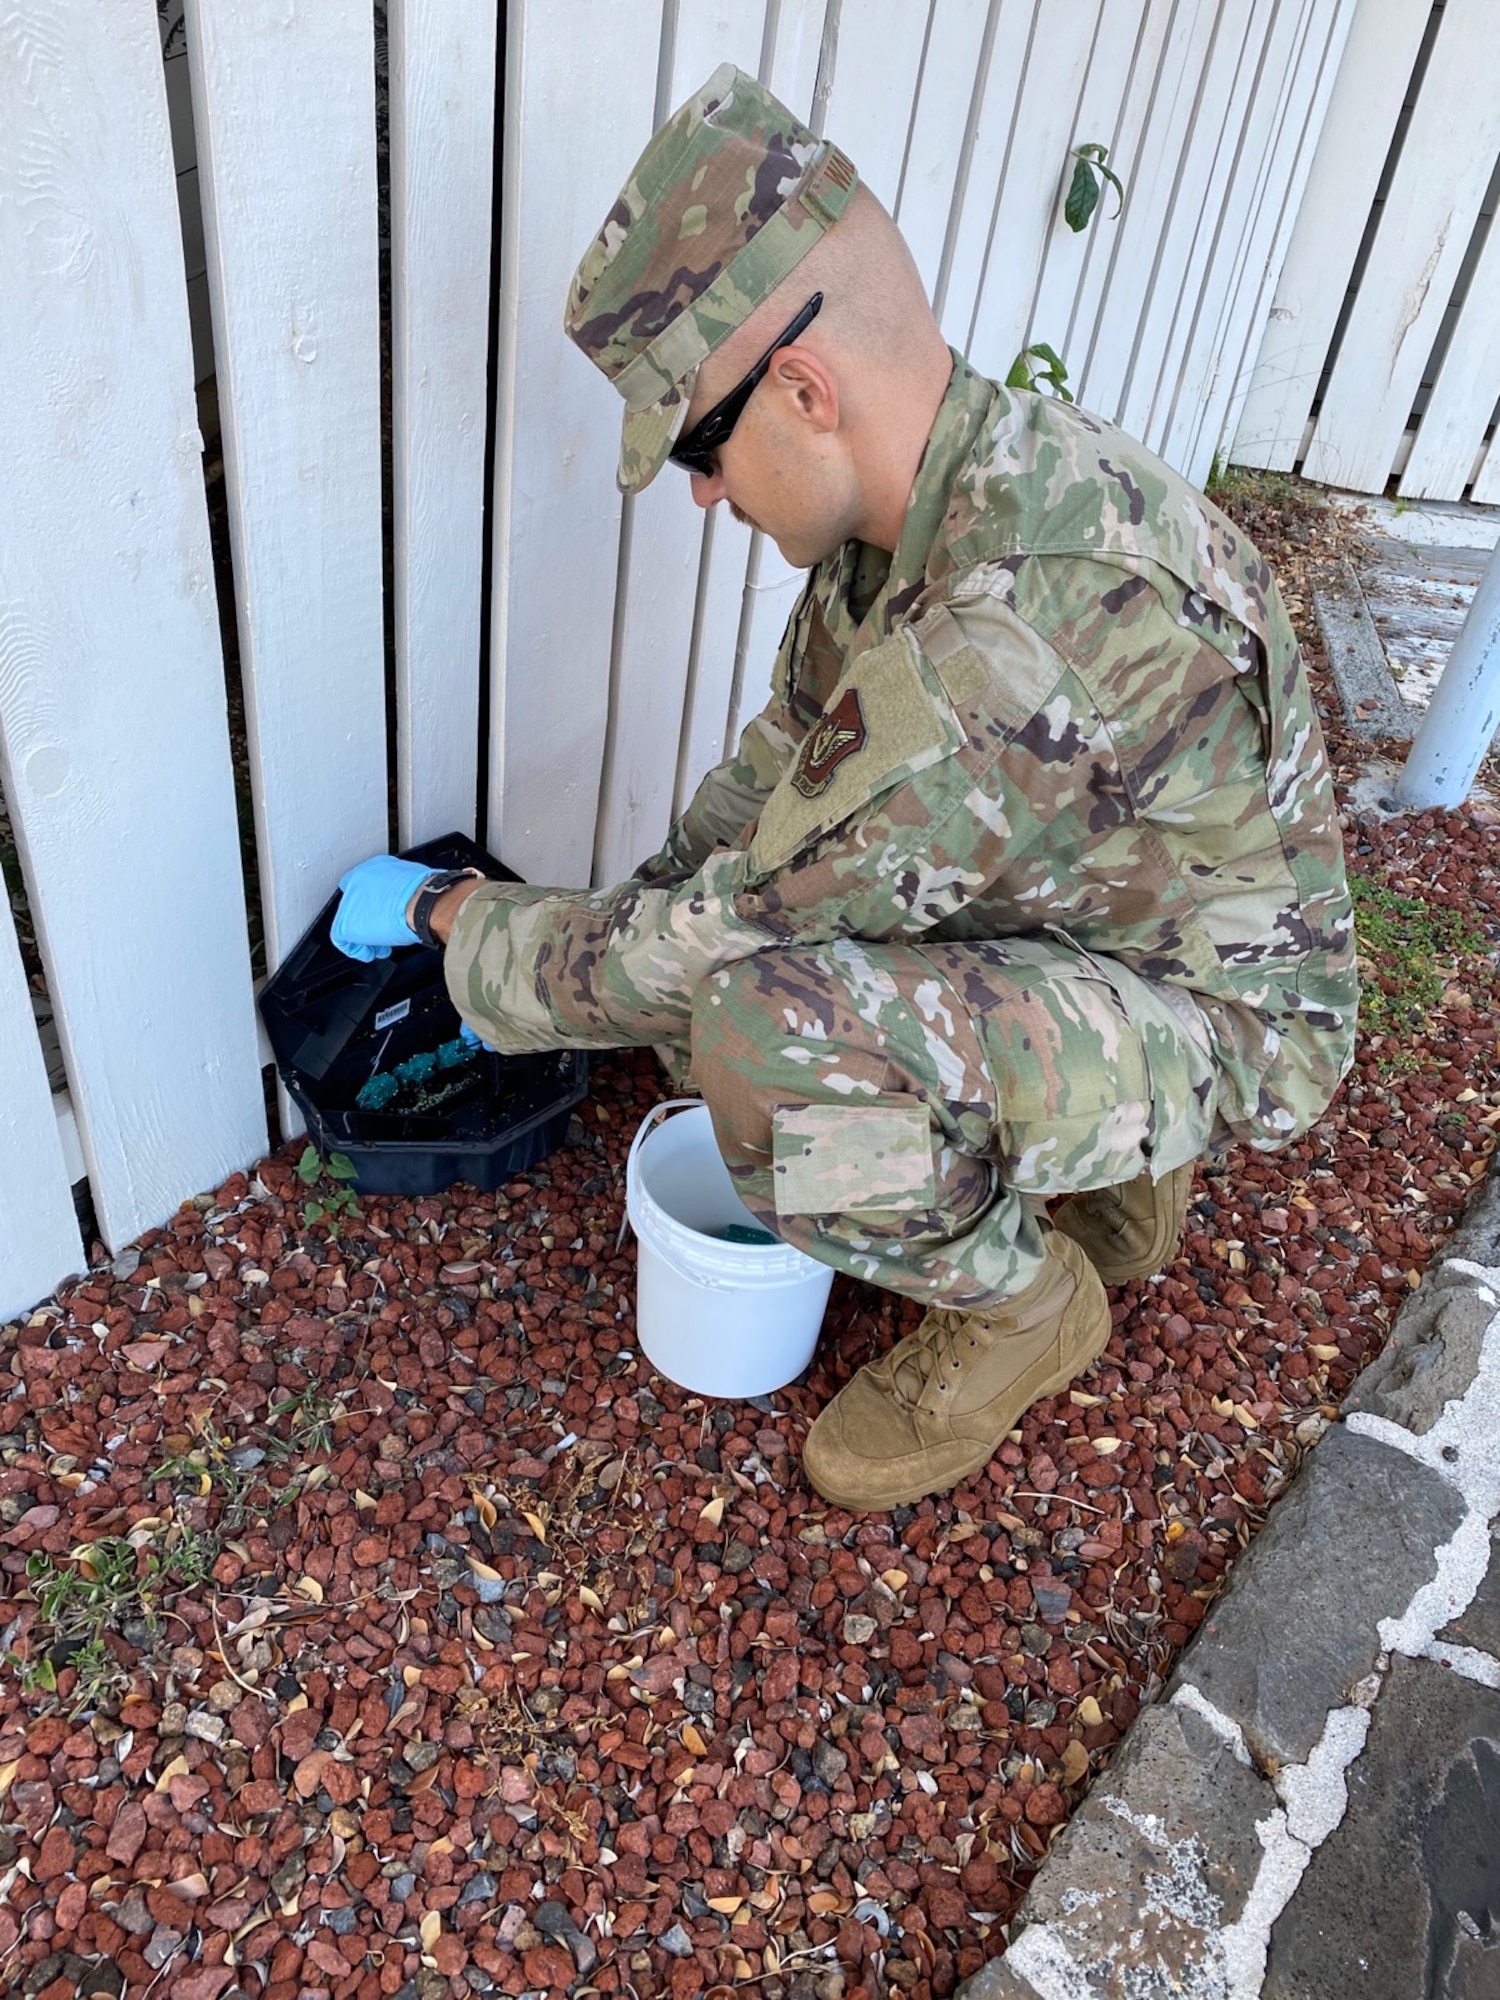 Senior Airman David Walker, 647th Civil Engineer Squadron pest management journeyman, refills the rodent bait stations around a building on Joint Base Pearl Harbor-Hickam, Hawaii, May 19, 2020. The bait attracts rodents to ensure the team can catch the pests before they enter JBPHH buildings. (Courtesy photo)